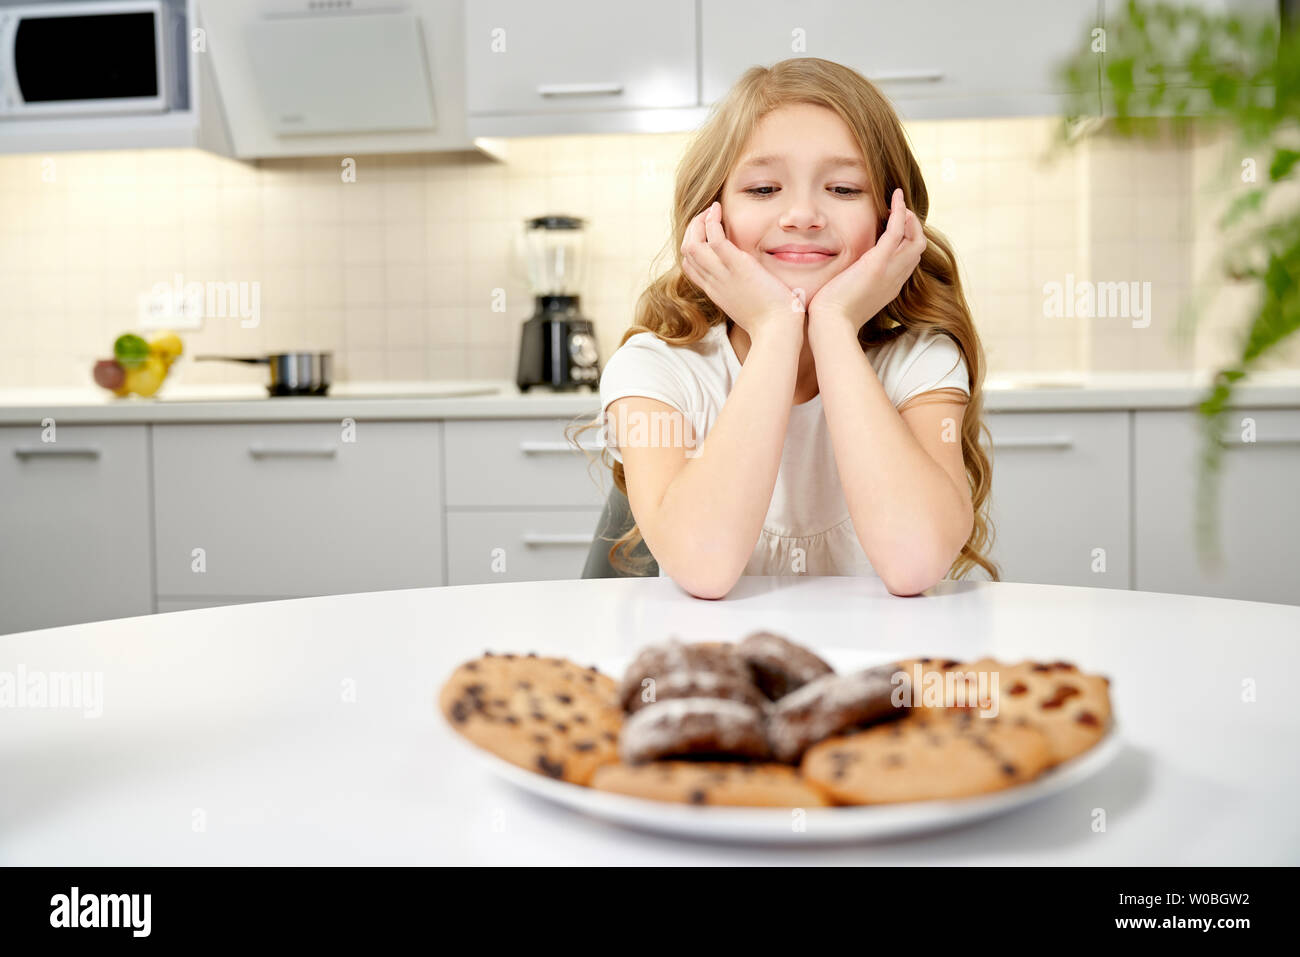 Front view of beautiful girl in white shirt sitting at table in kitchen, putting head on hands and looking at tasty cookies. Pretty child wishing chocolate desserts. Concept of sweets and eating. Stock Photo